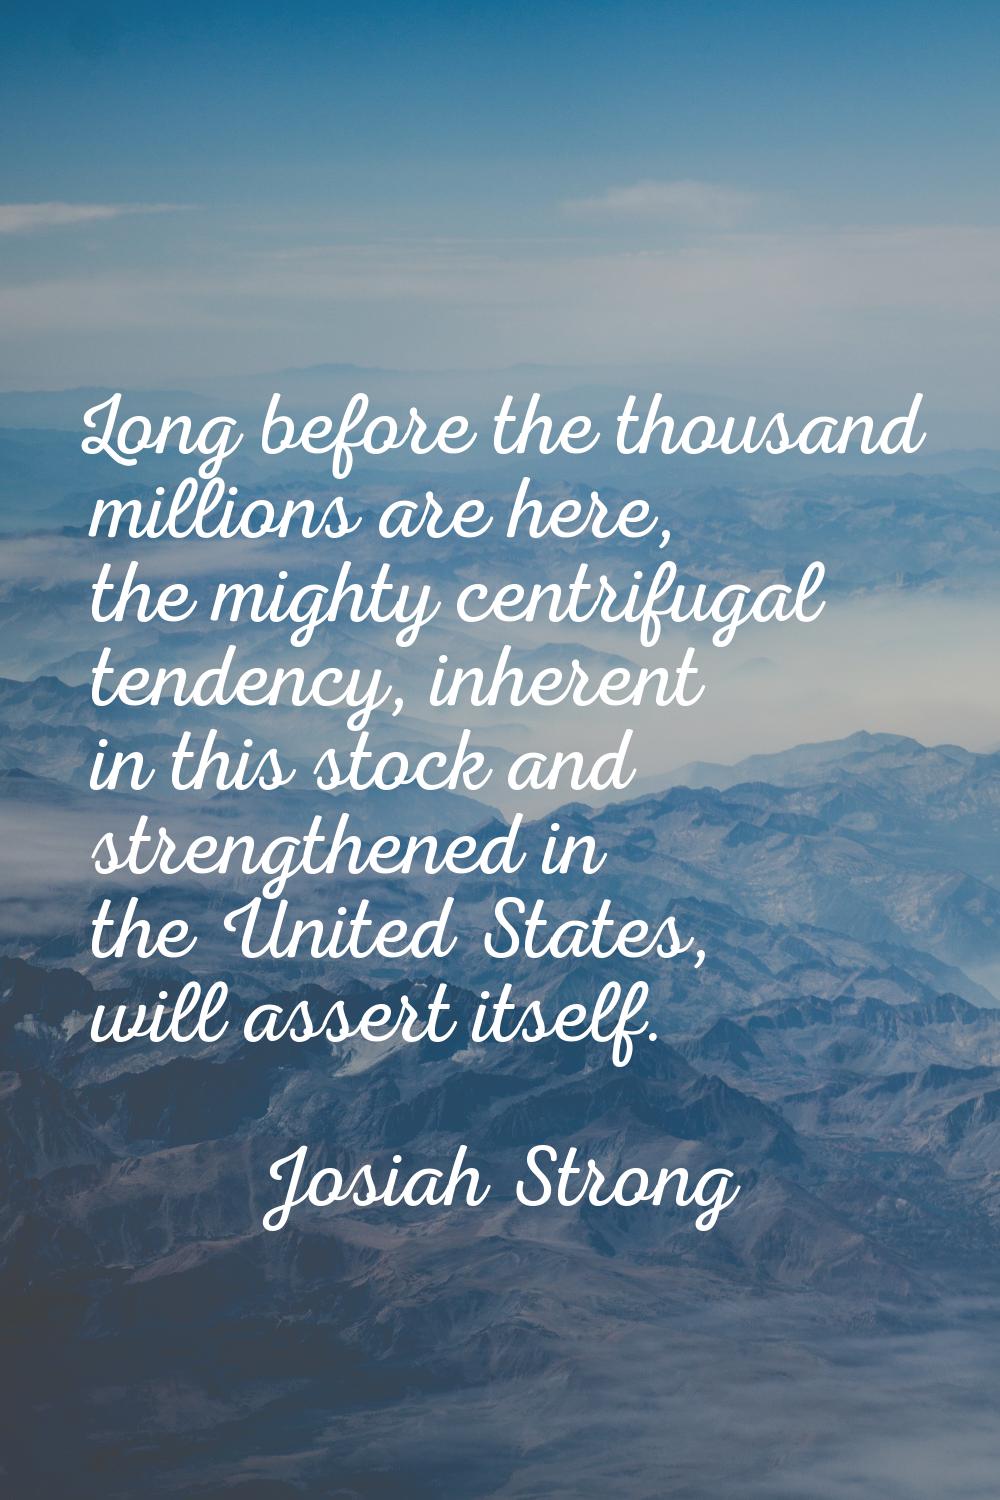 Long before the thousand millions are here, the mighty centrifugal tendency, inherent in this stock